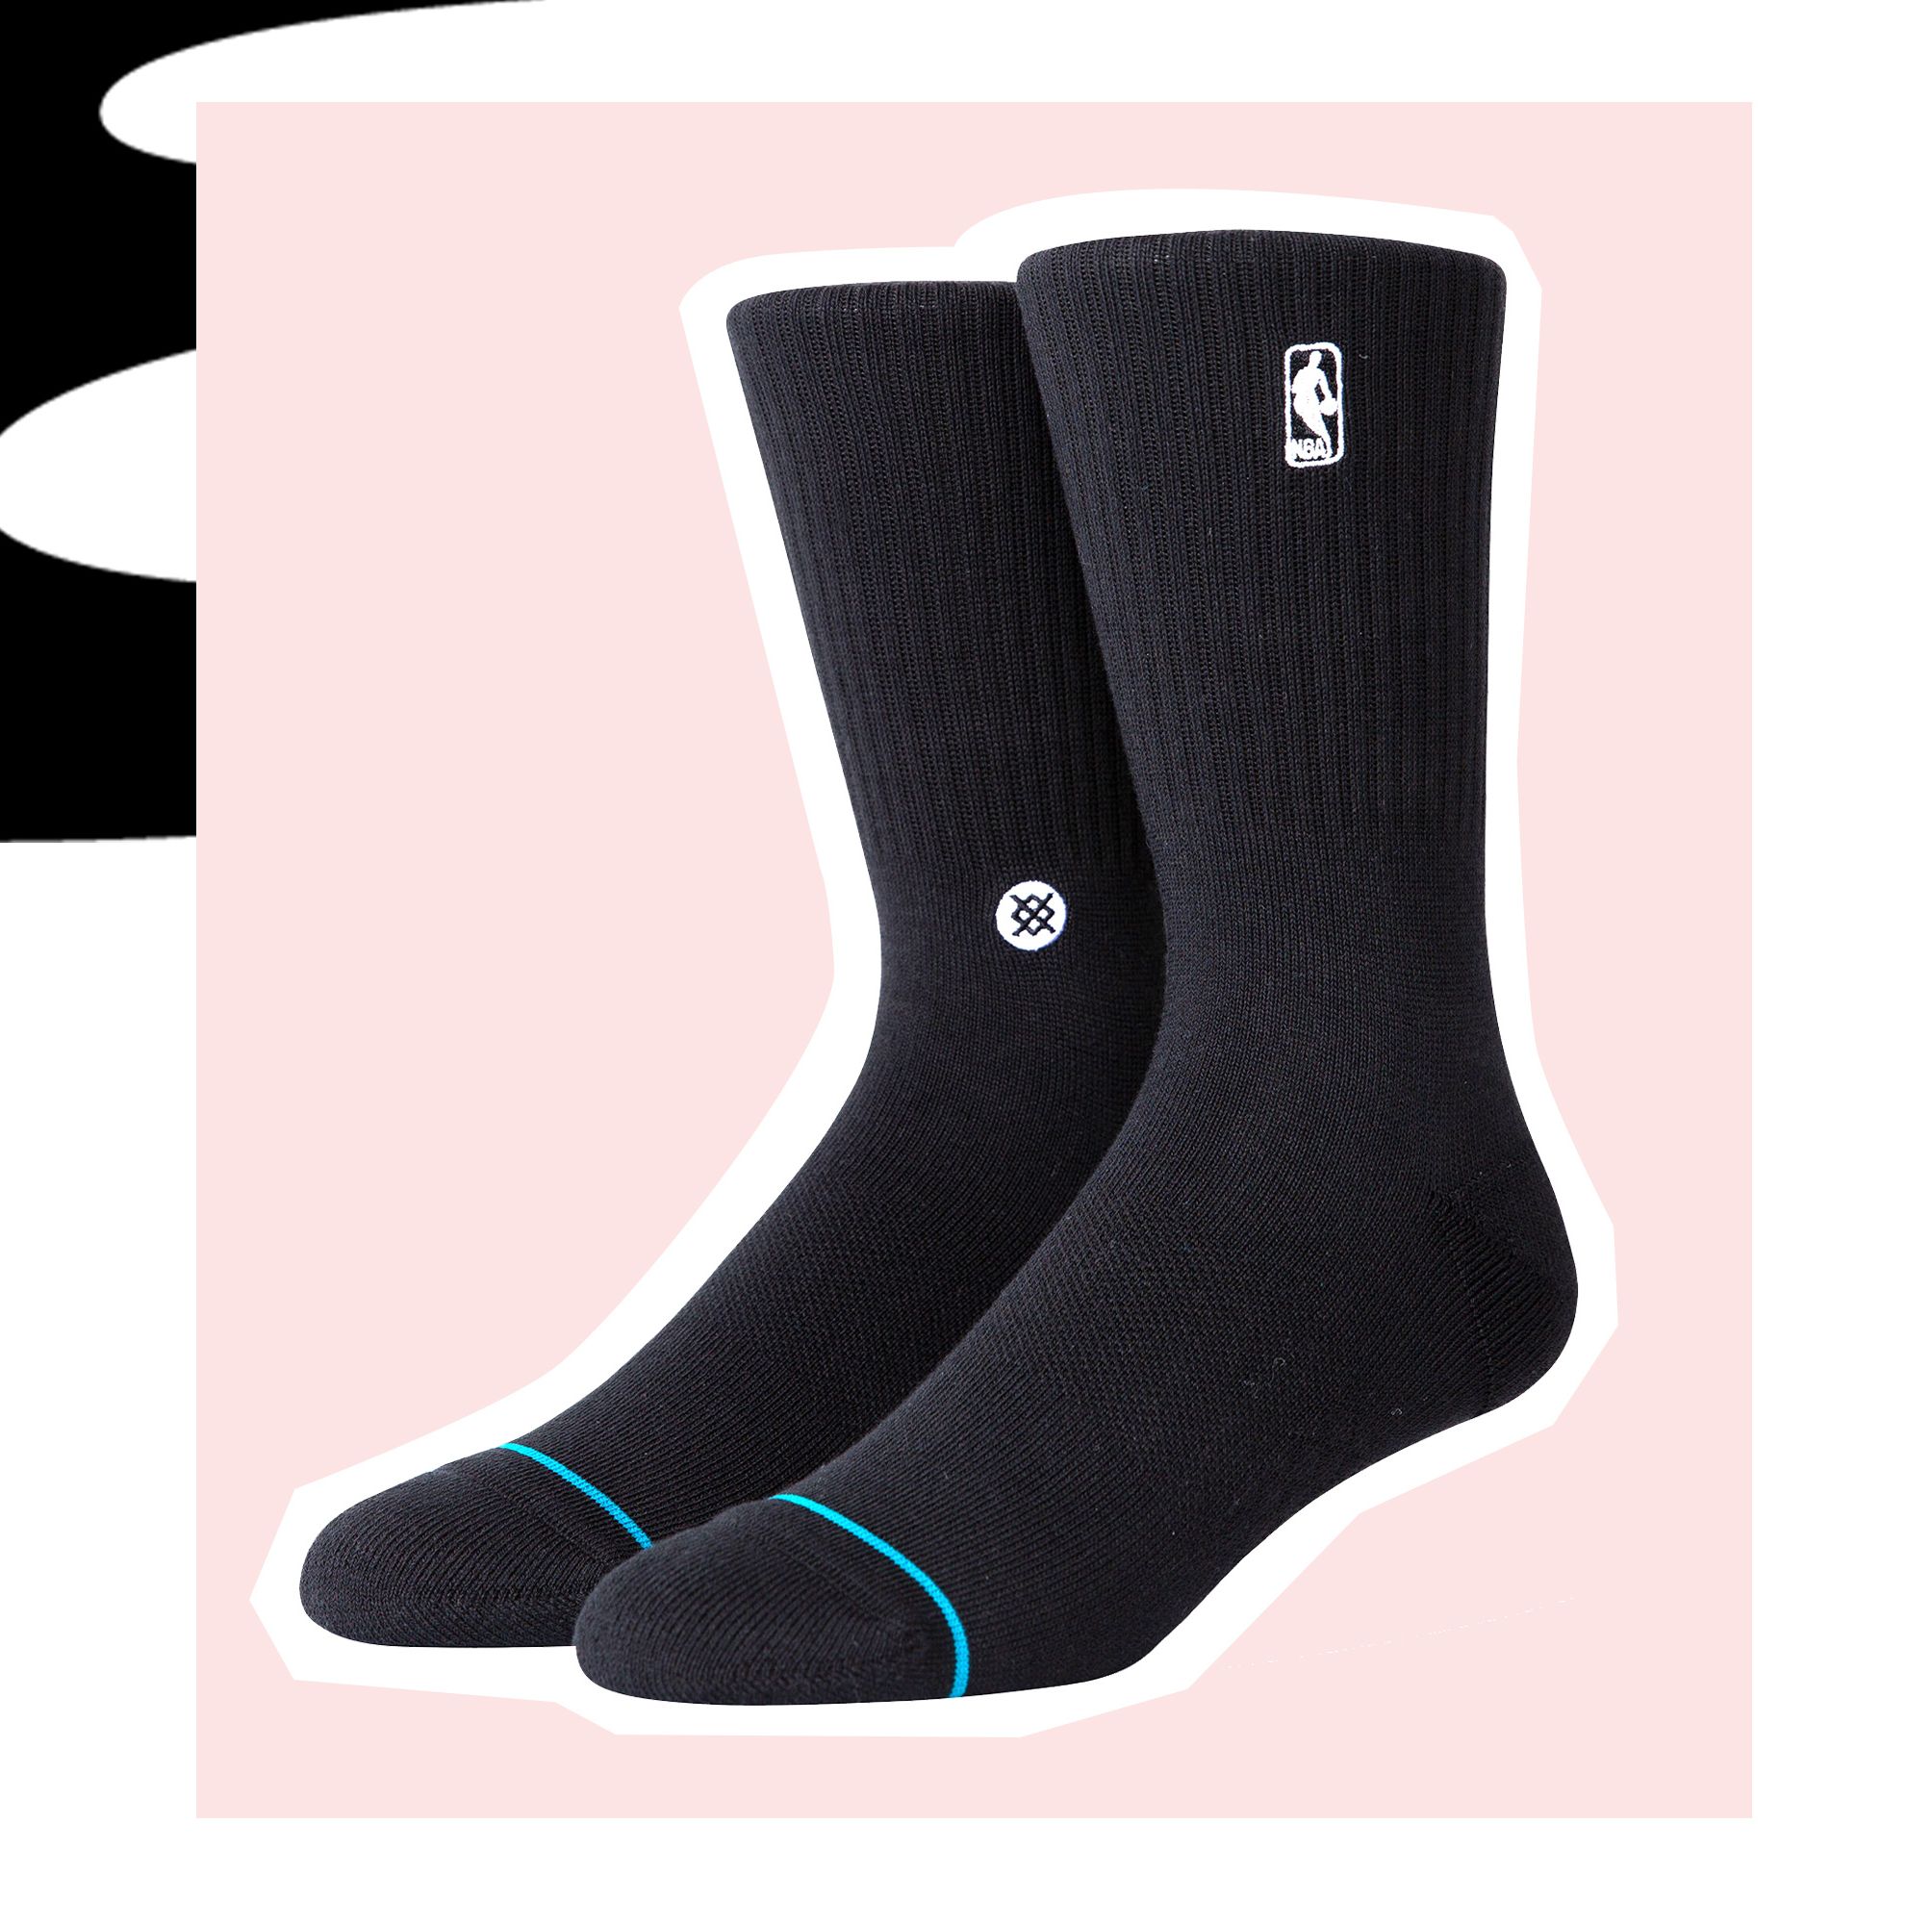 The Best Socks to Add to Your Regular Rotation